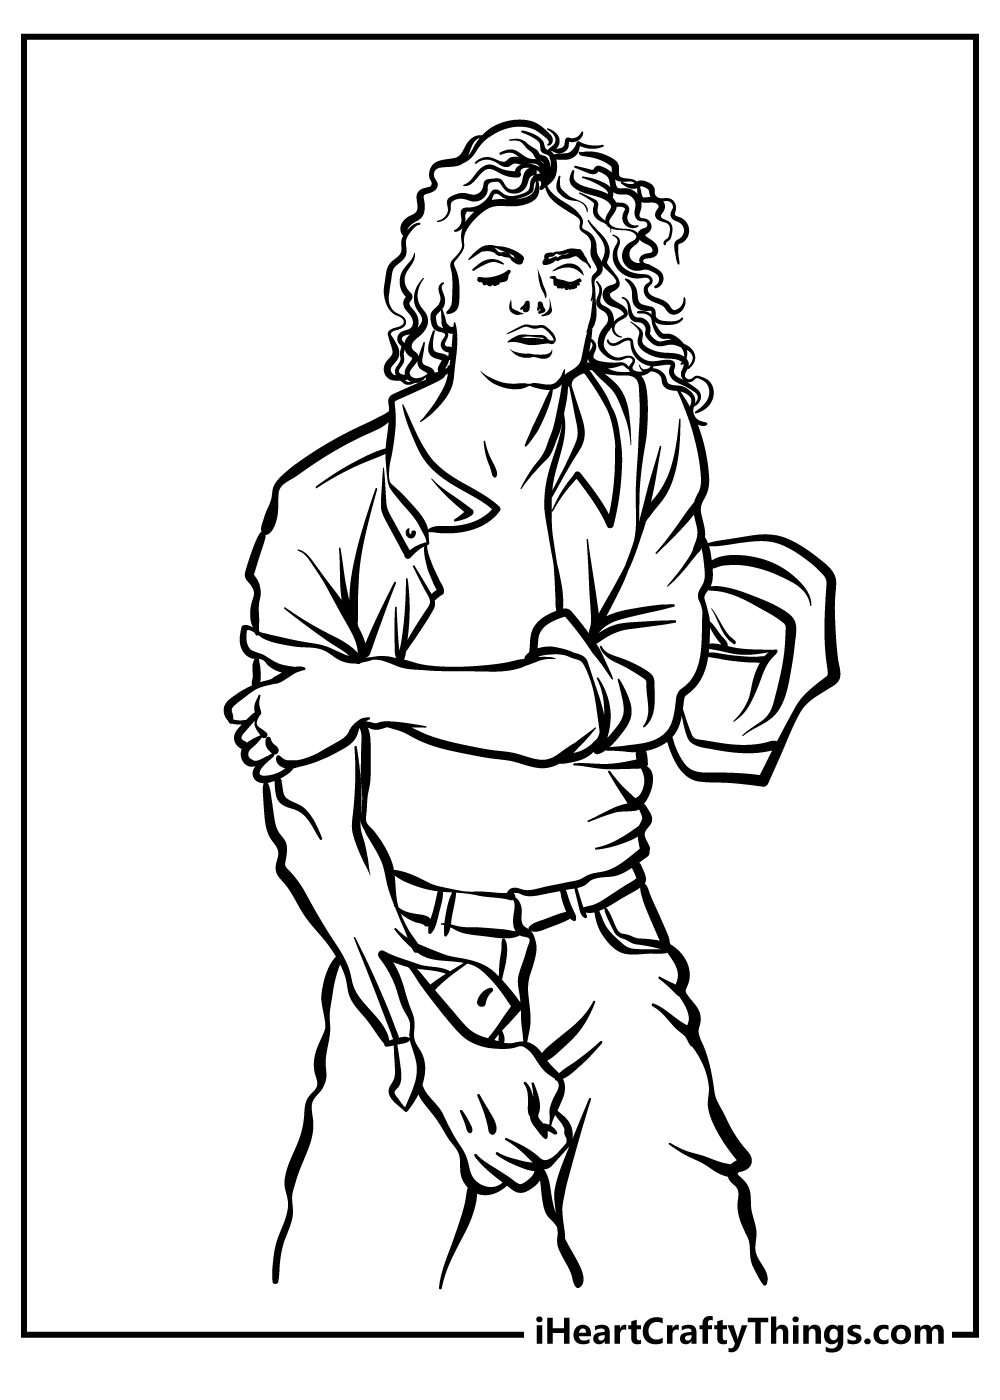 Michael Jackson Coloring Pages for preschoolers free printable